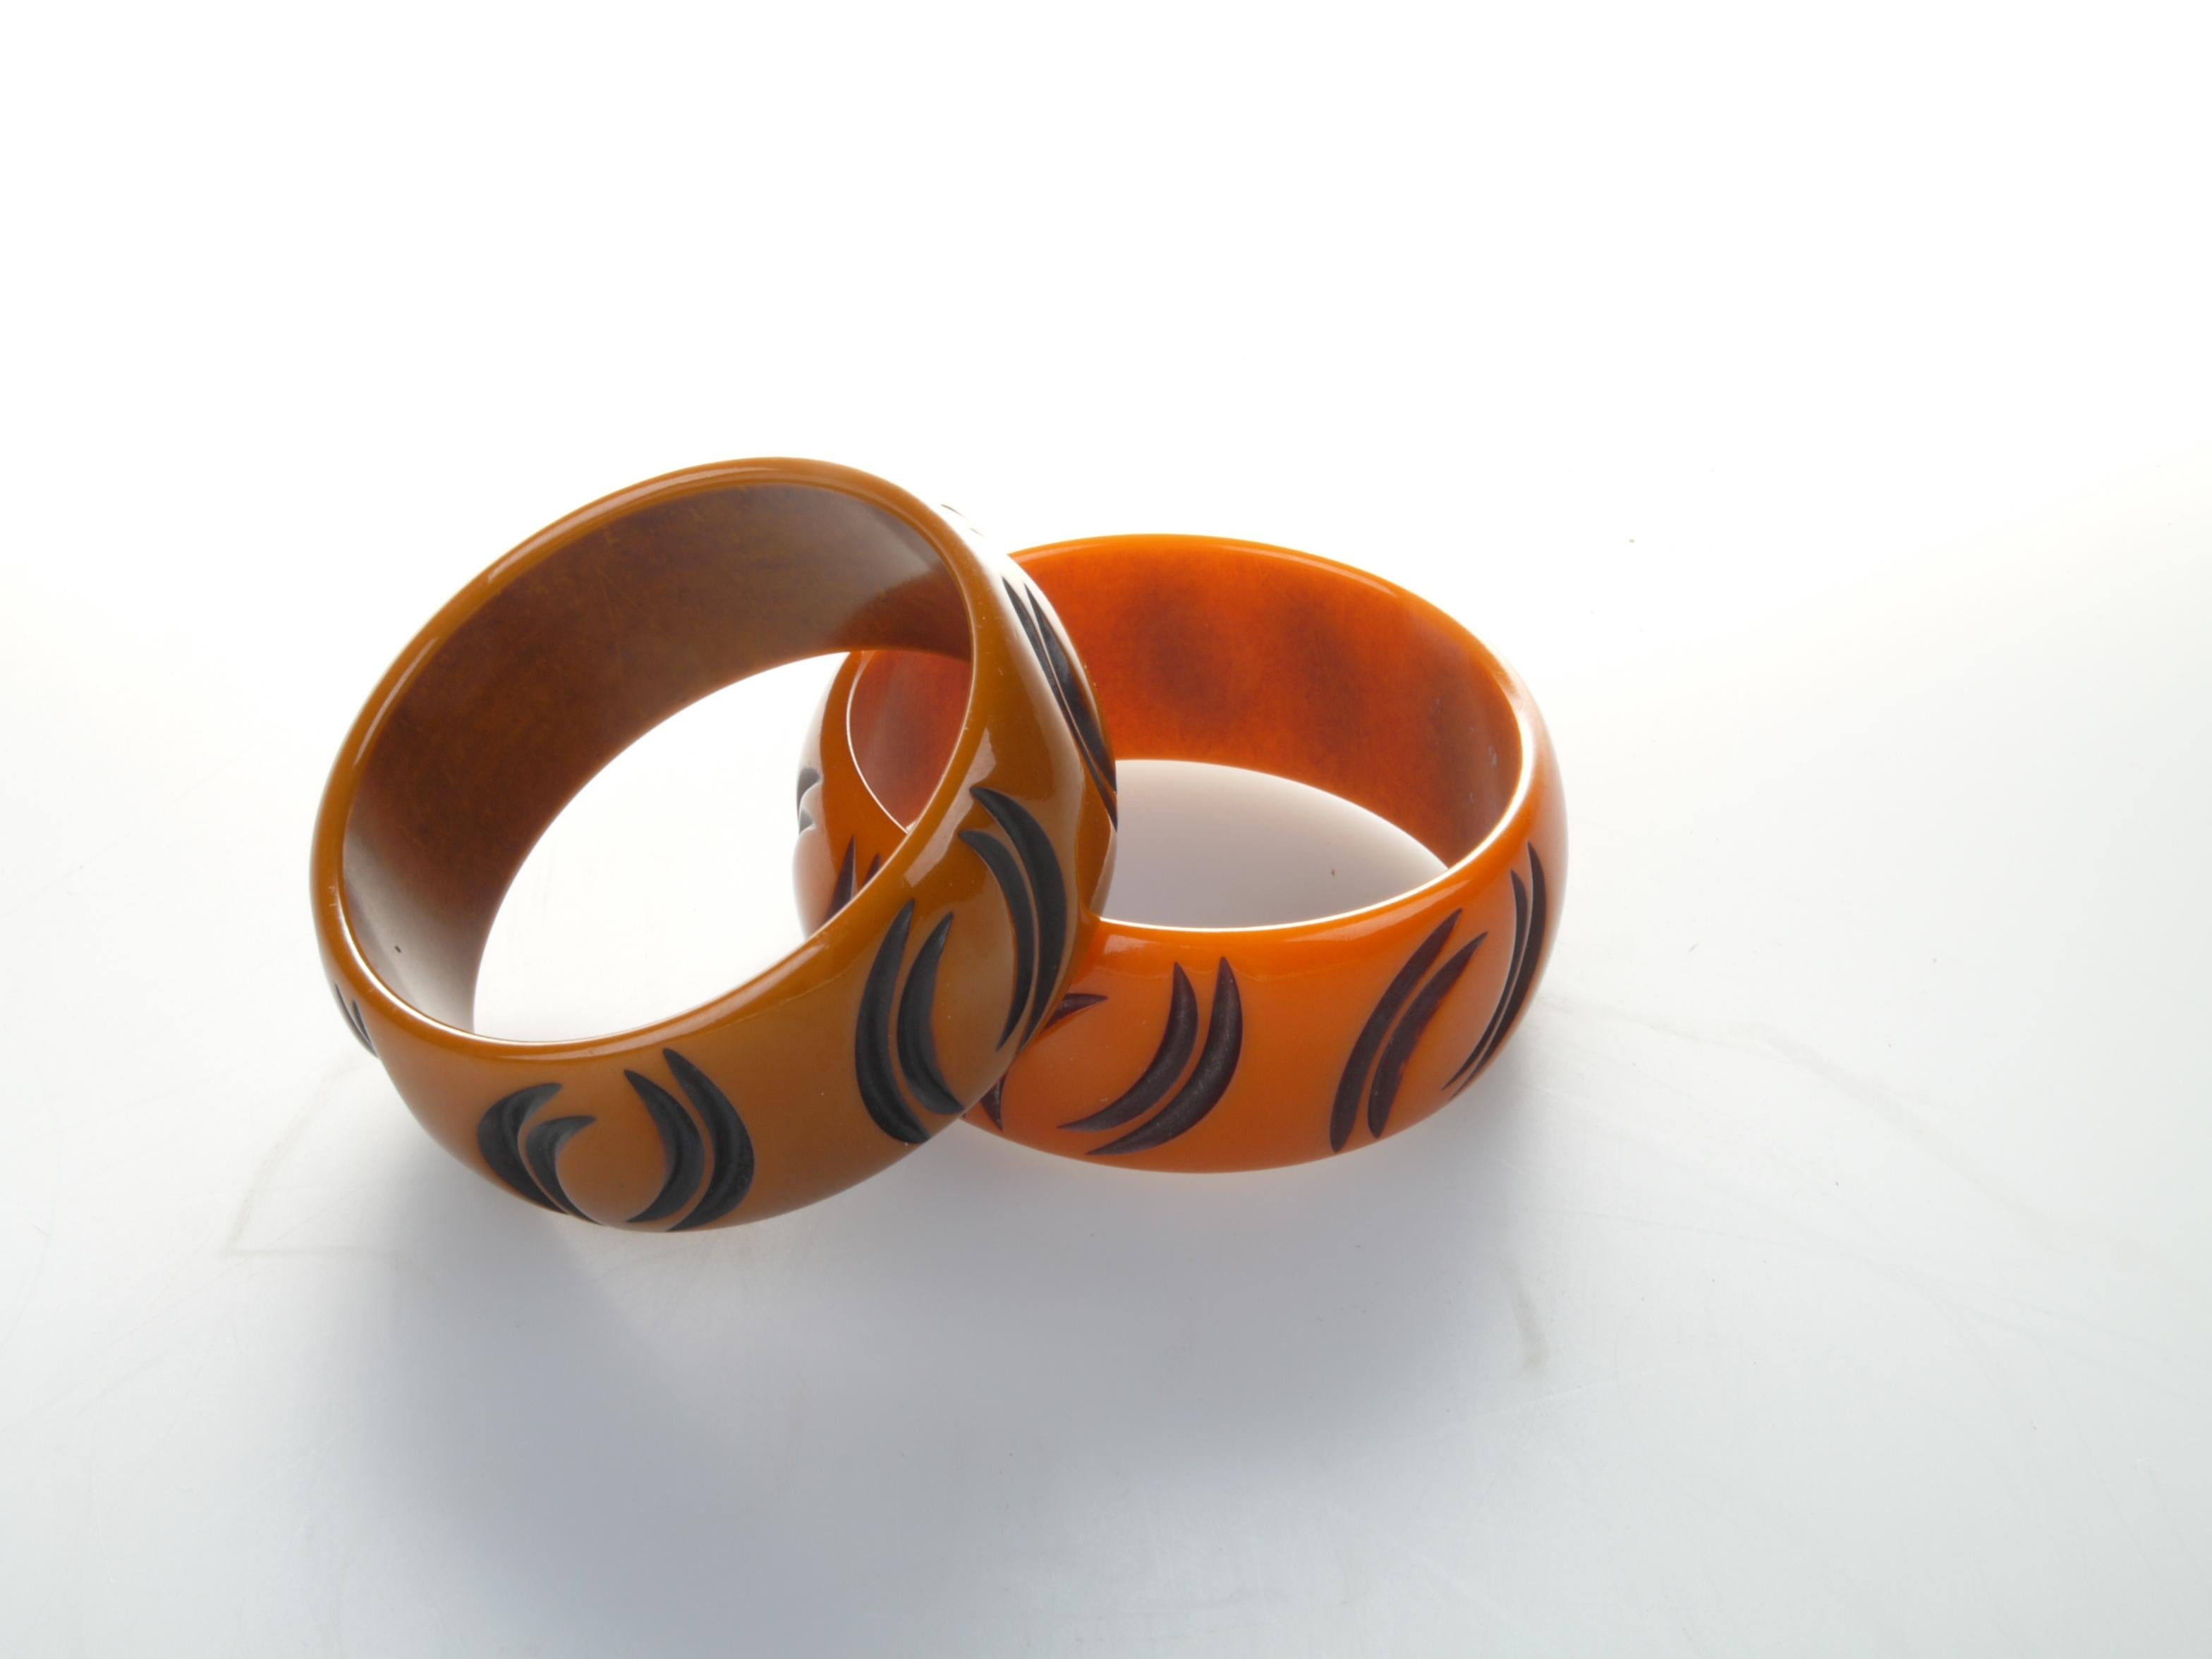 American vintage stunning pair of bakelite bracelets from the 1930s.
Measure: Circumference 9 inches.

  